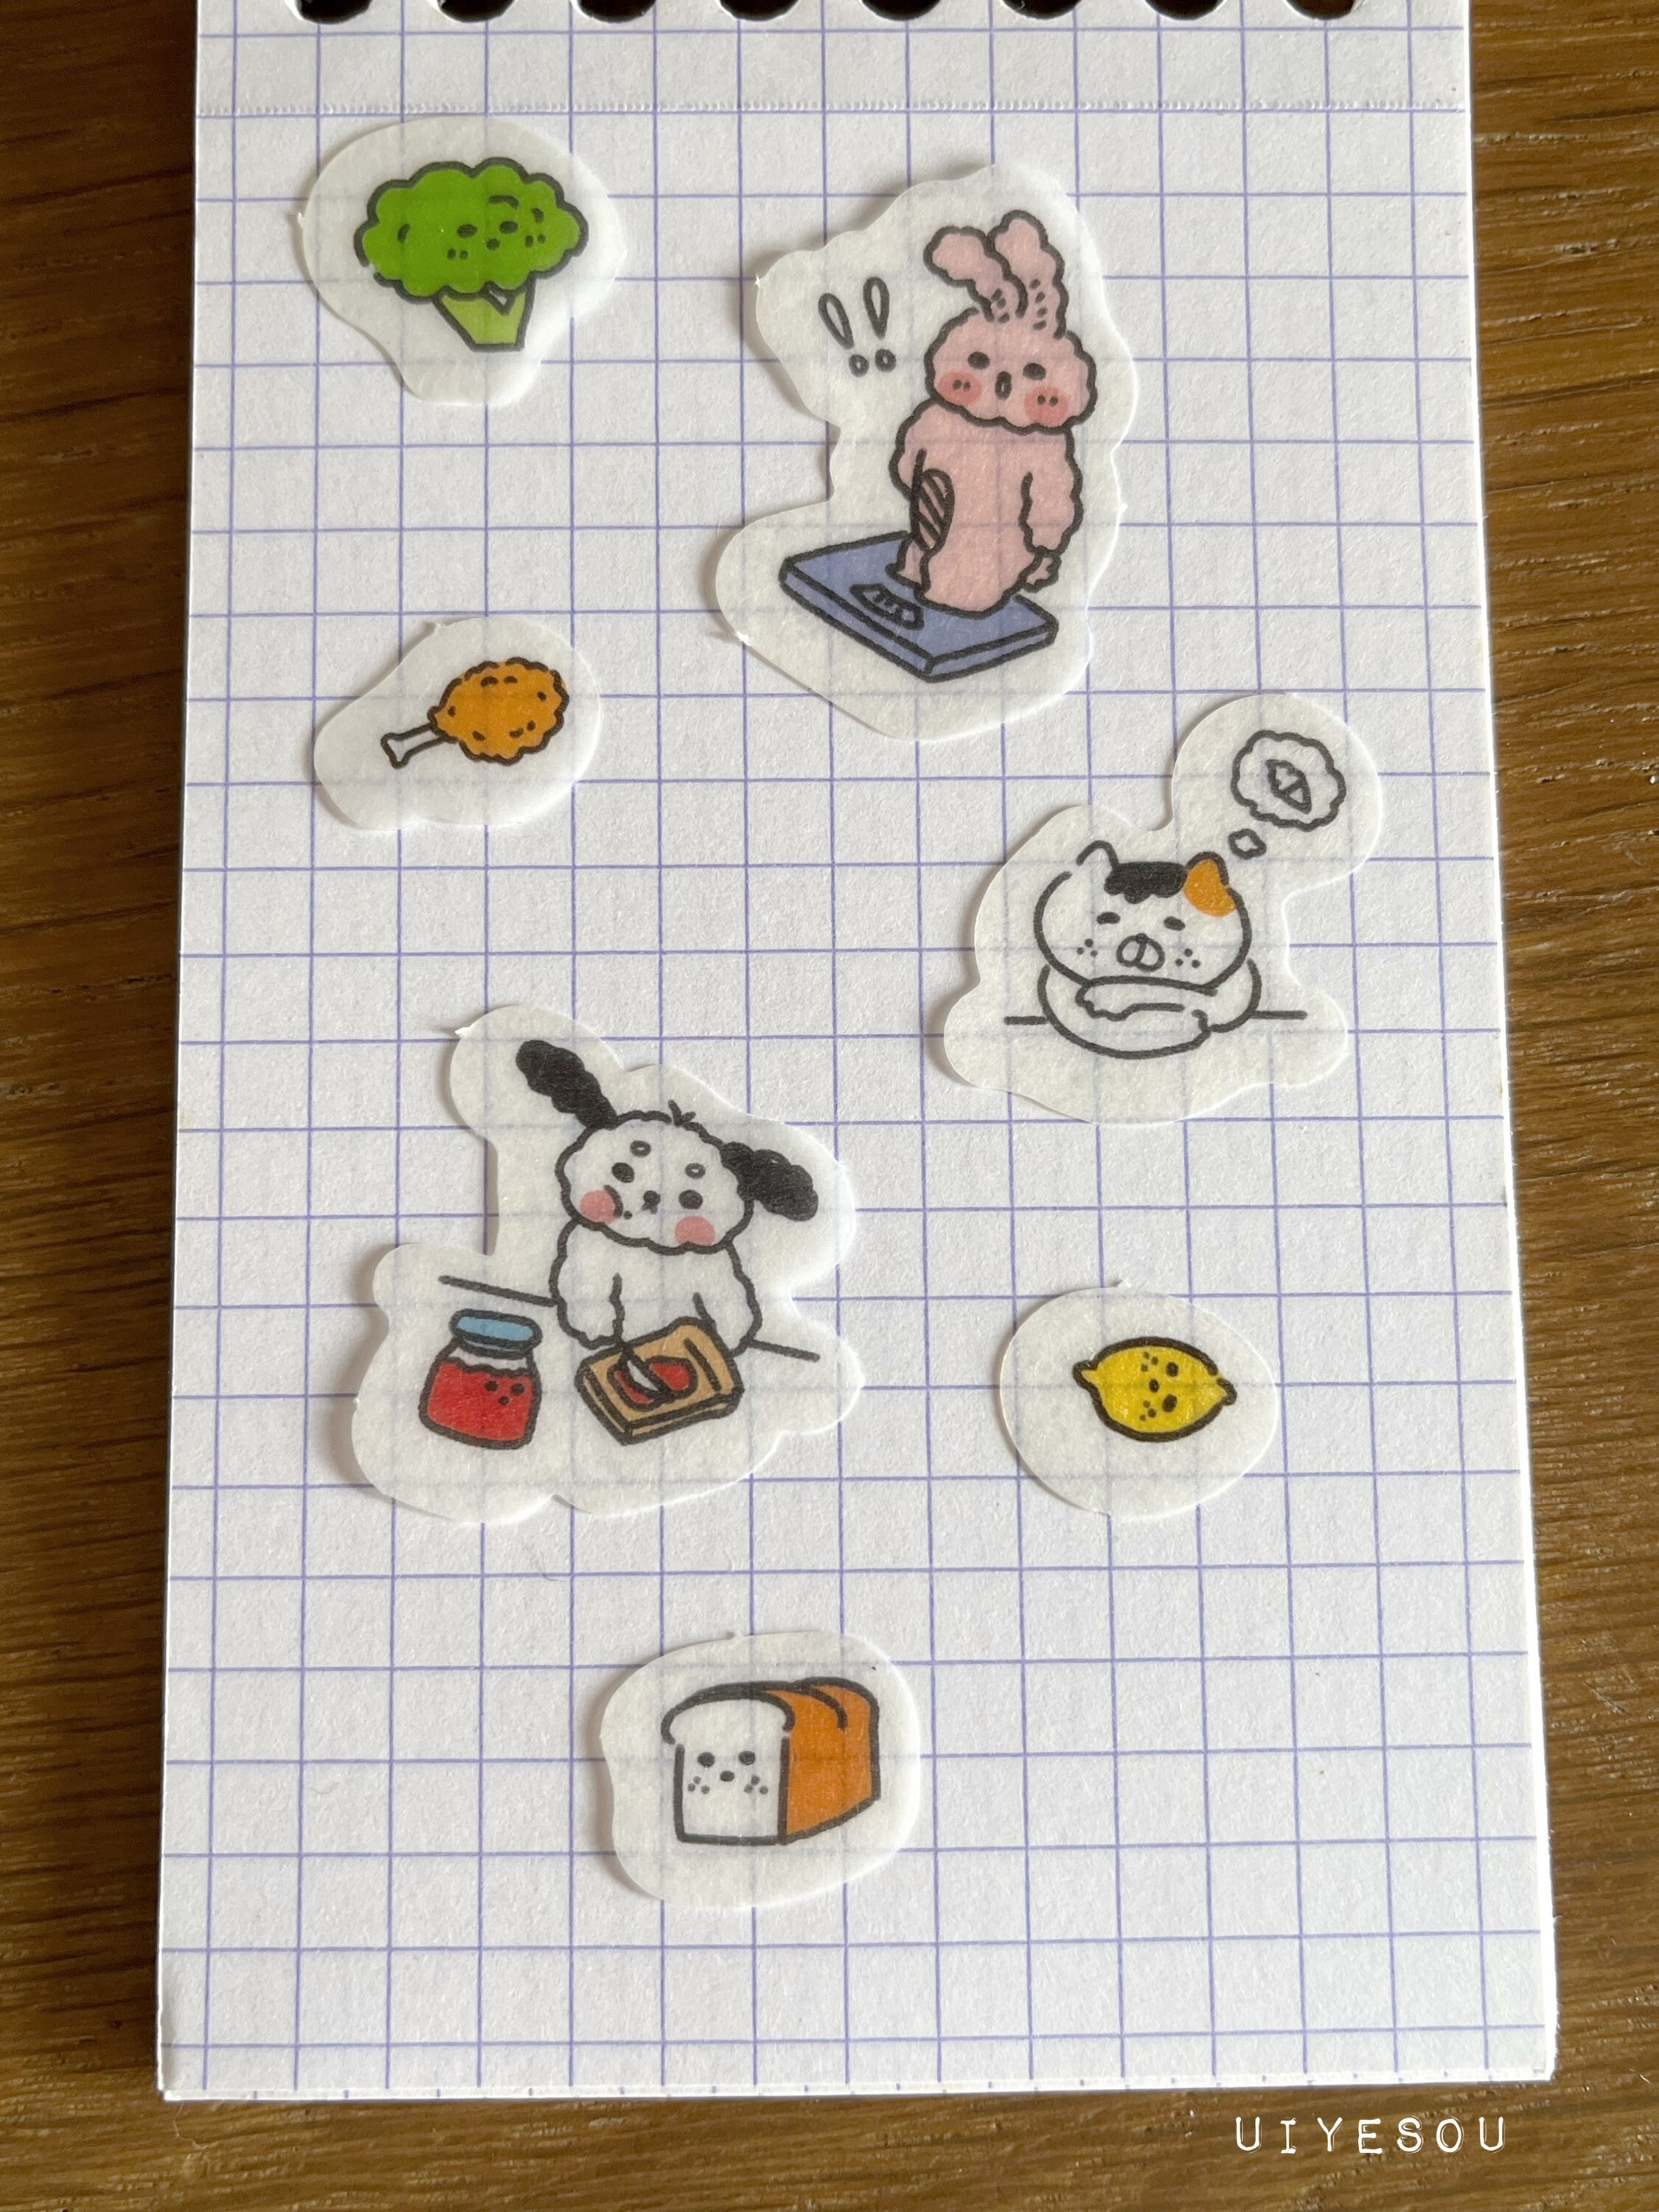 Pet Stickers holiday: 20pcs Kawaii Stickers for Journaling Cute Japanese  Designs for Snailmail Penpals Journaling Birthday 